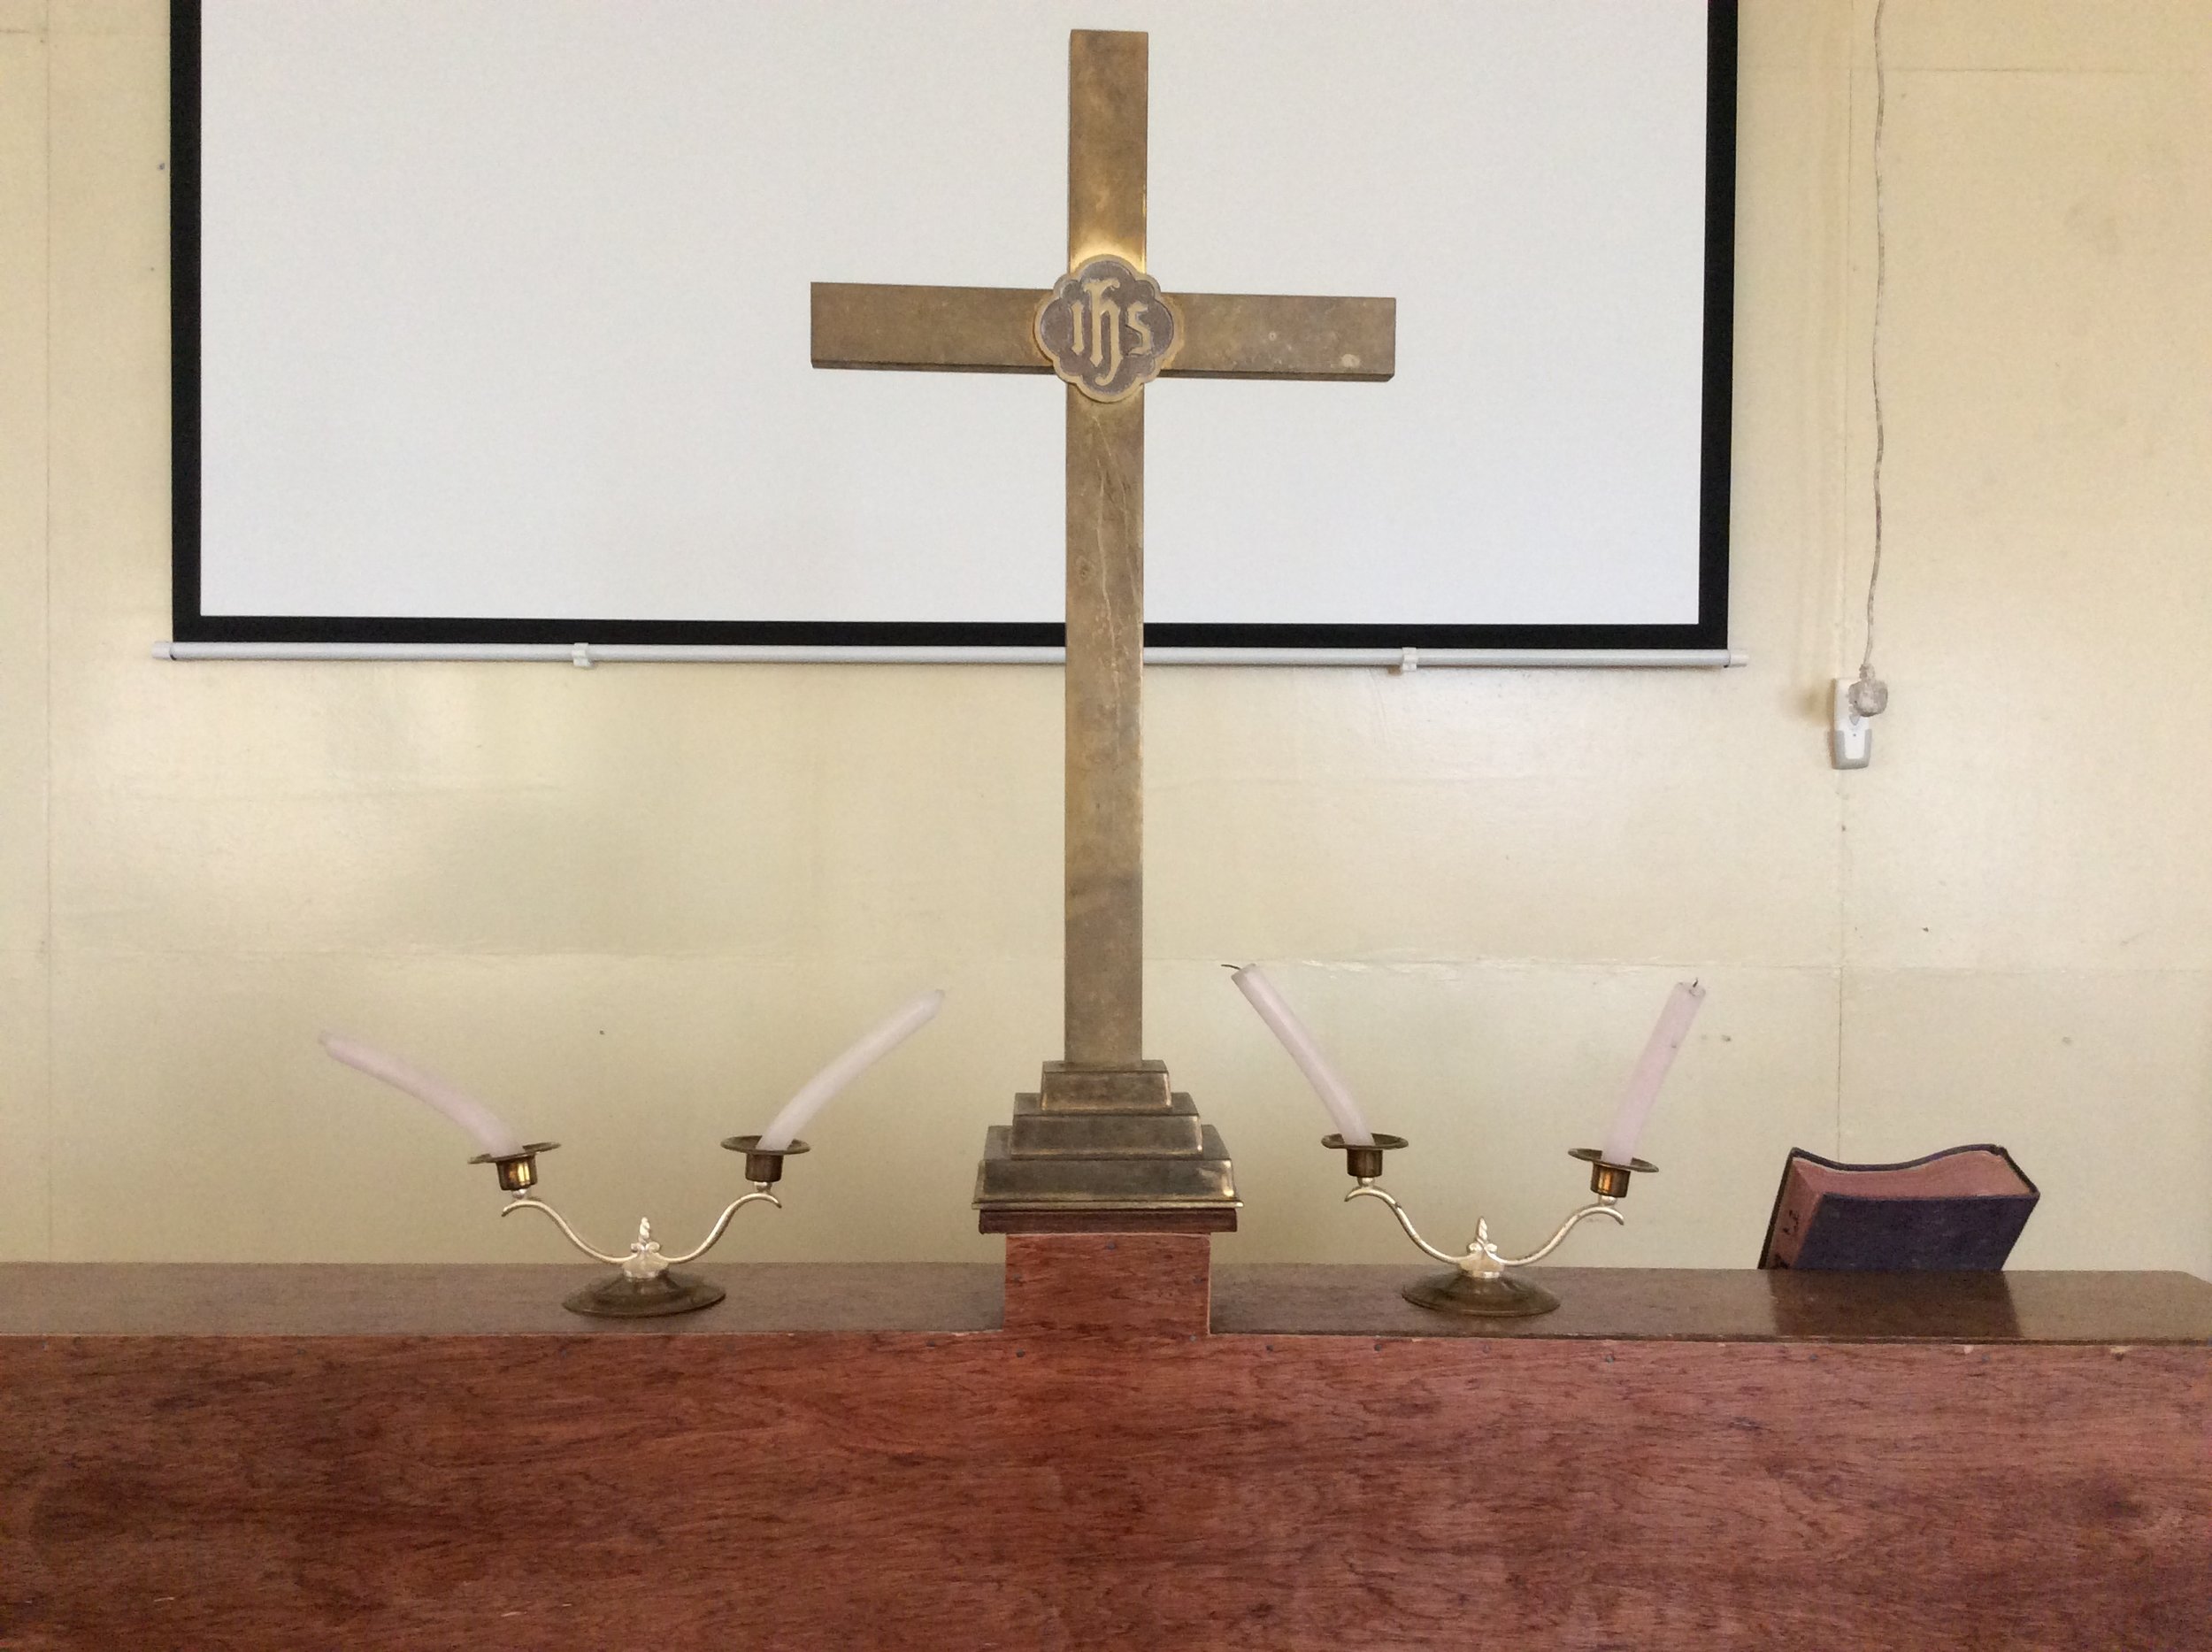  The altar at the School of Theology. &nbsp;We lit three candles for advent. &nbsp;Notice how the candles lean. &nbsp;Africa heat is no joke! 